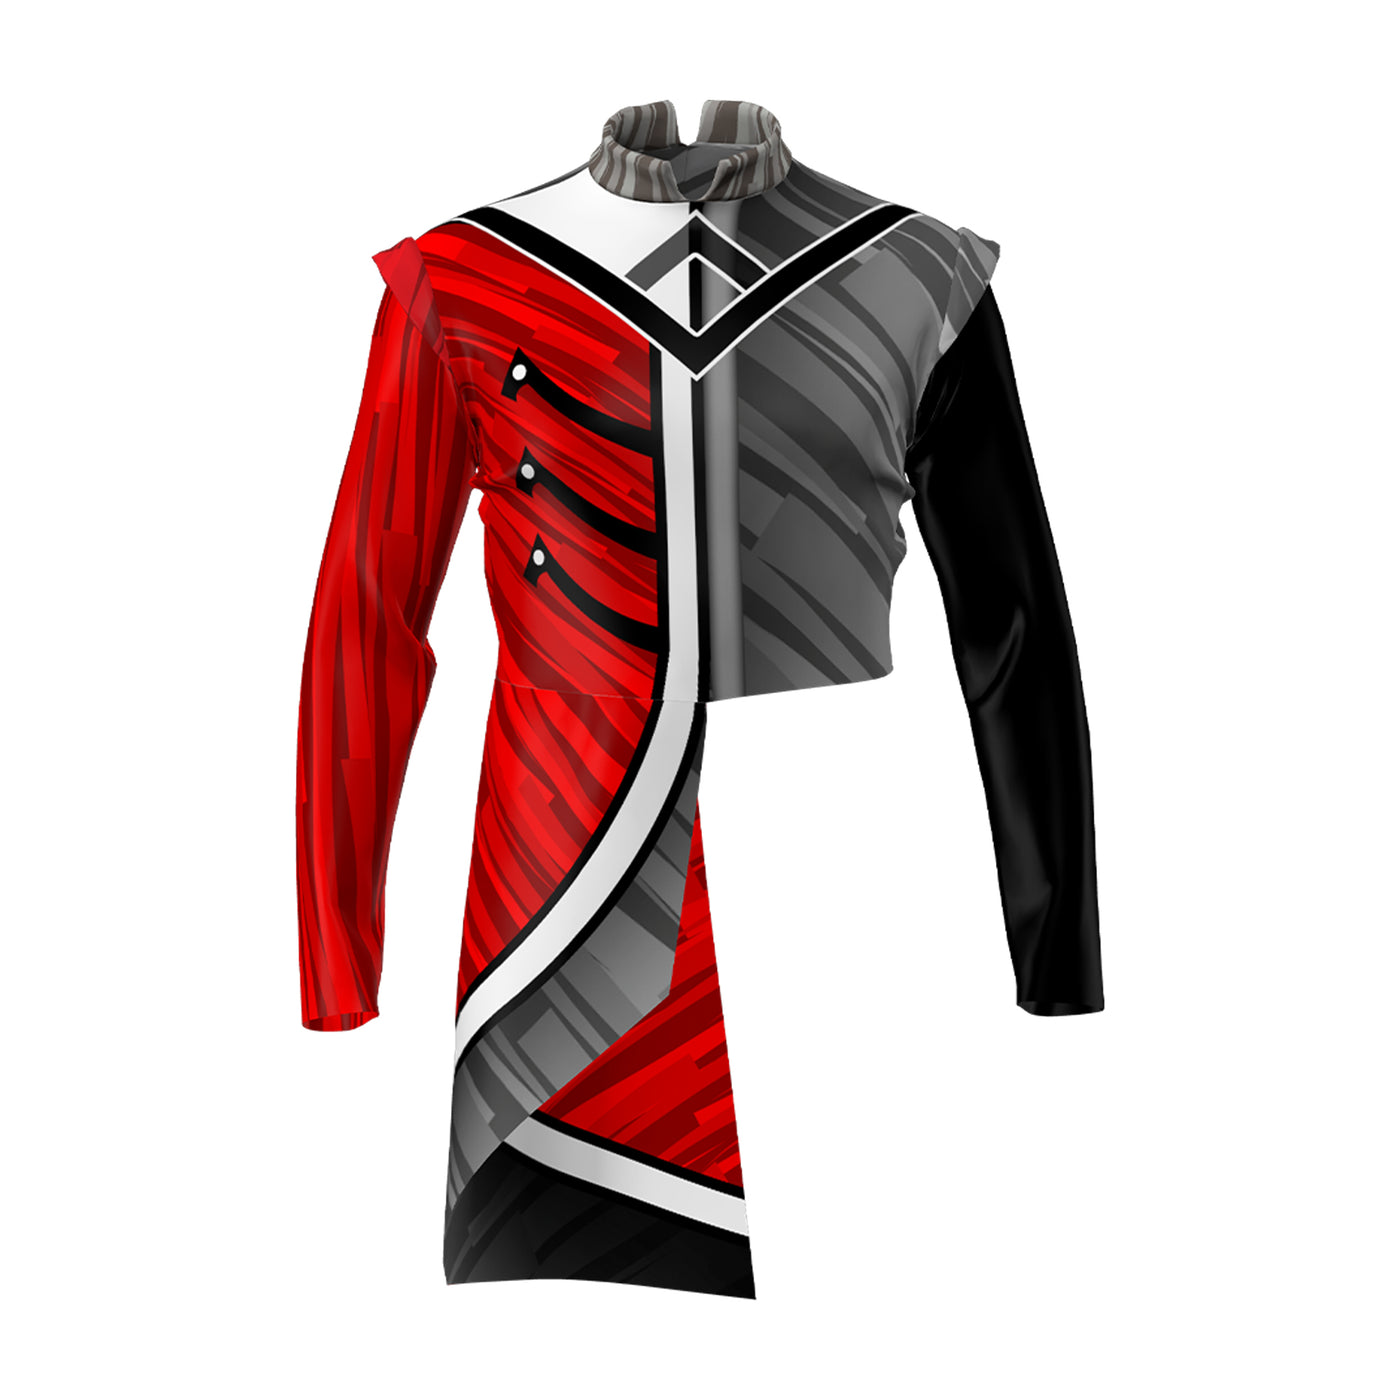 red marching band jacket